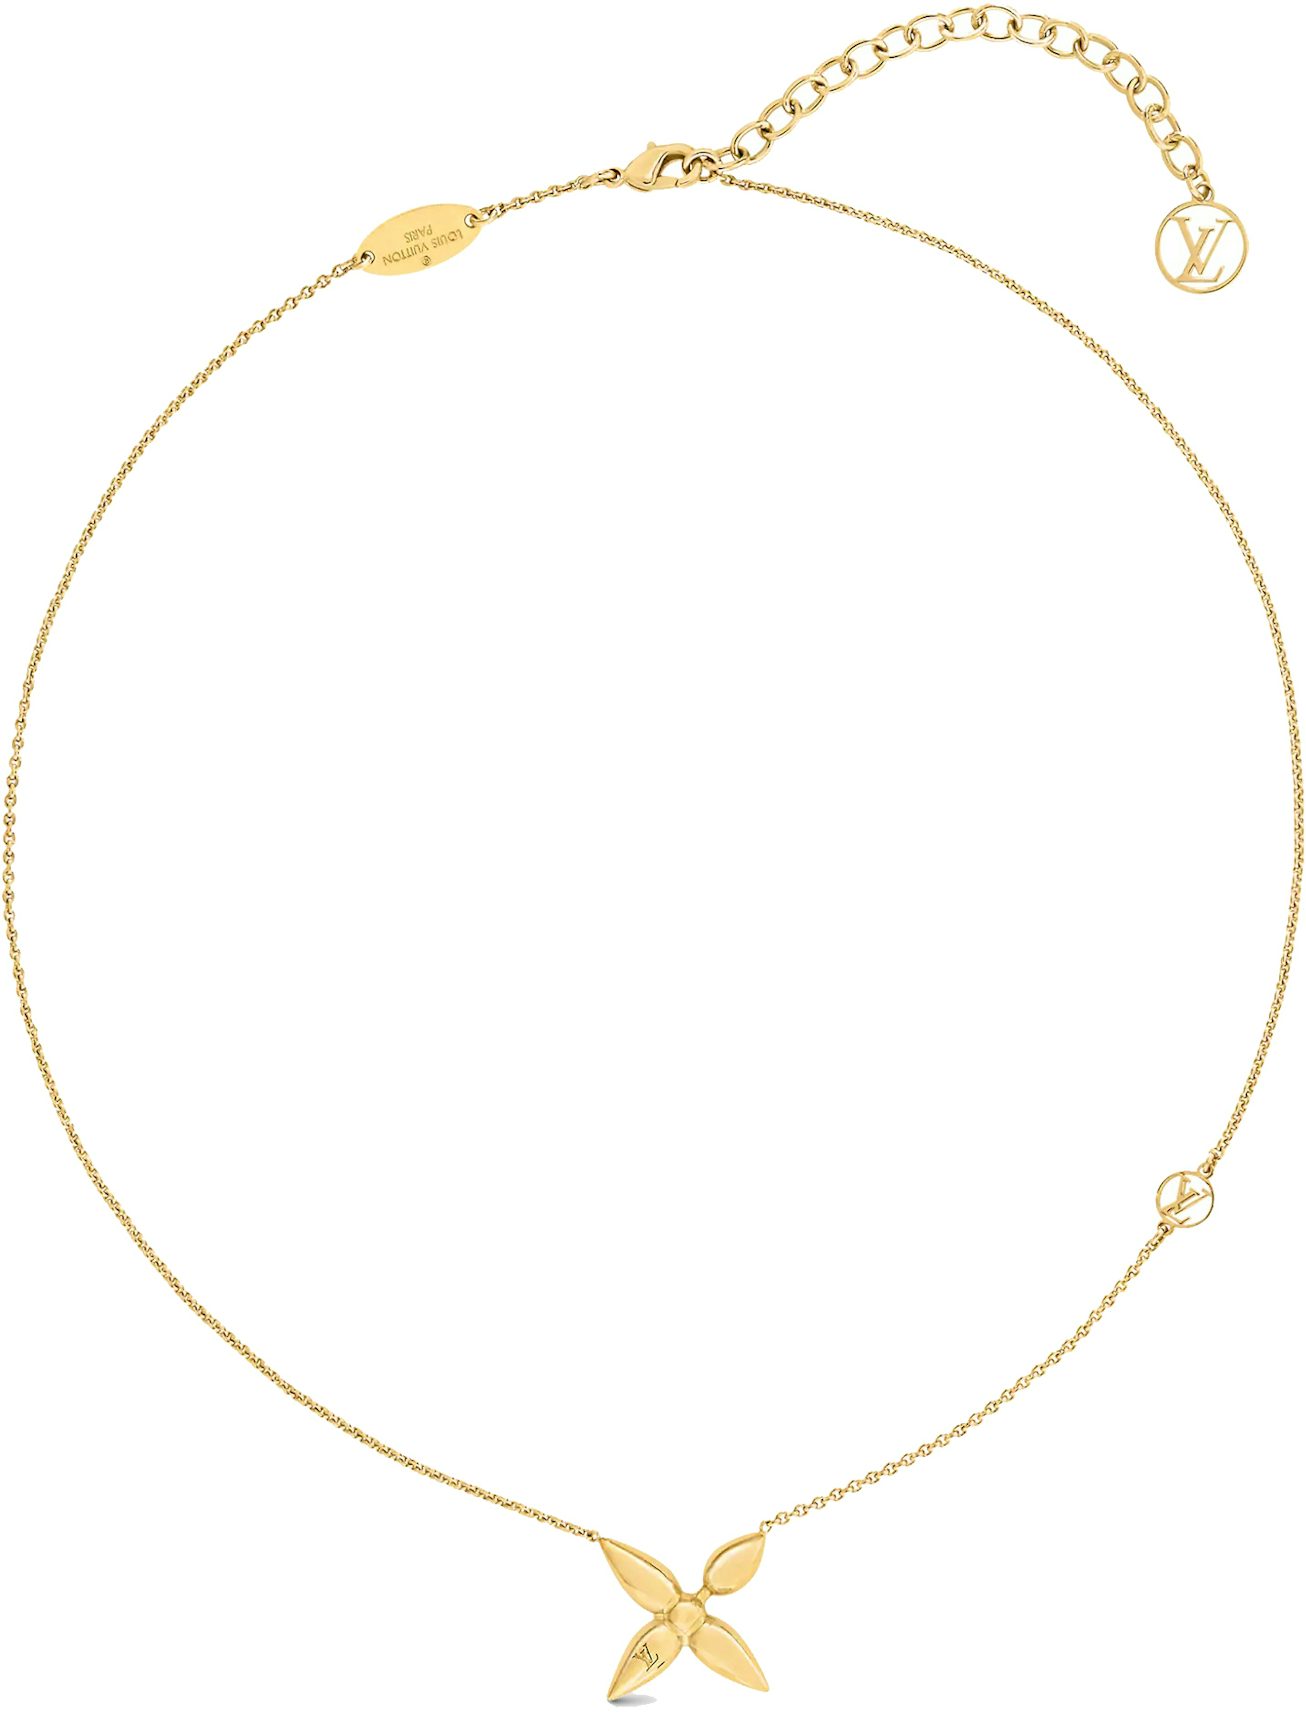 Louise necklace Louis Vuitton Gold in Gold plated - 32129670